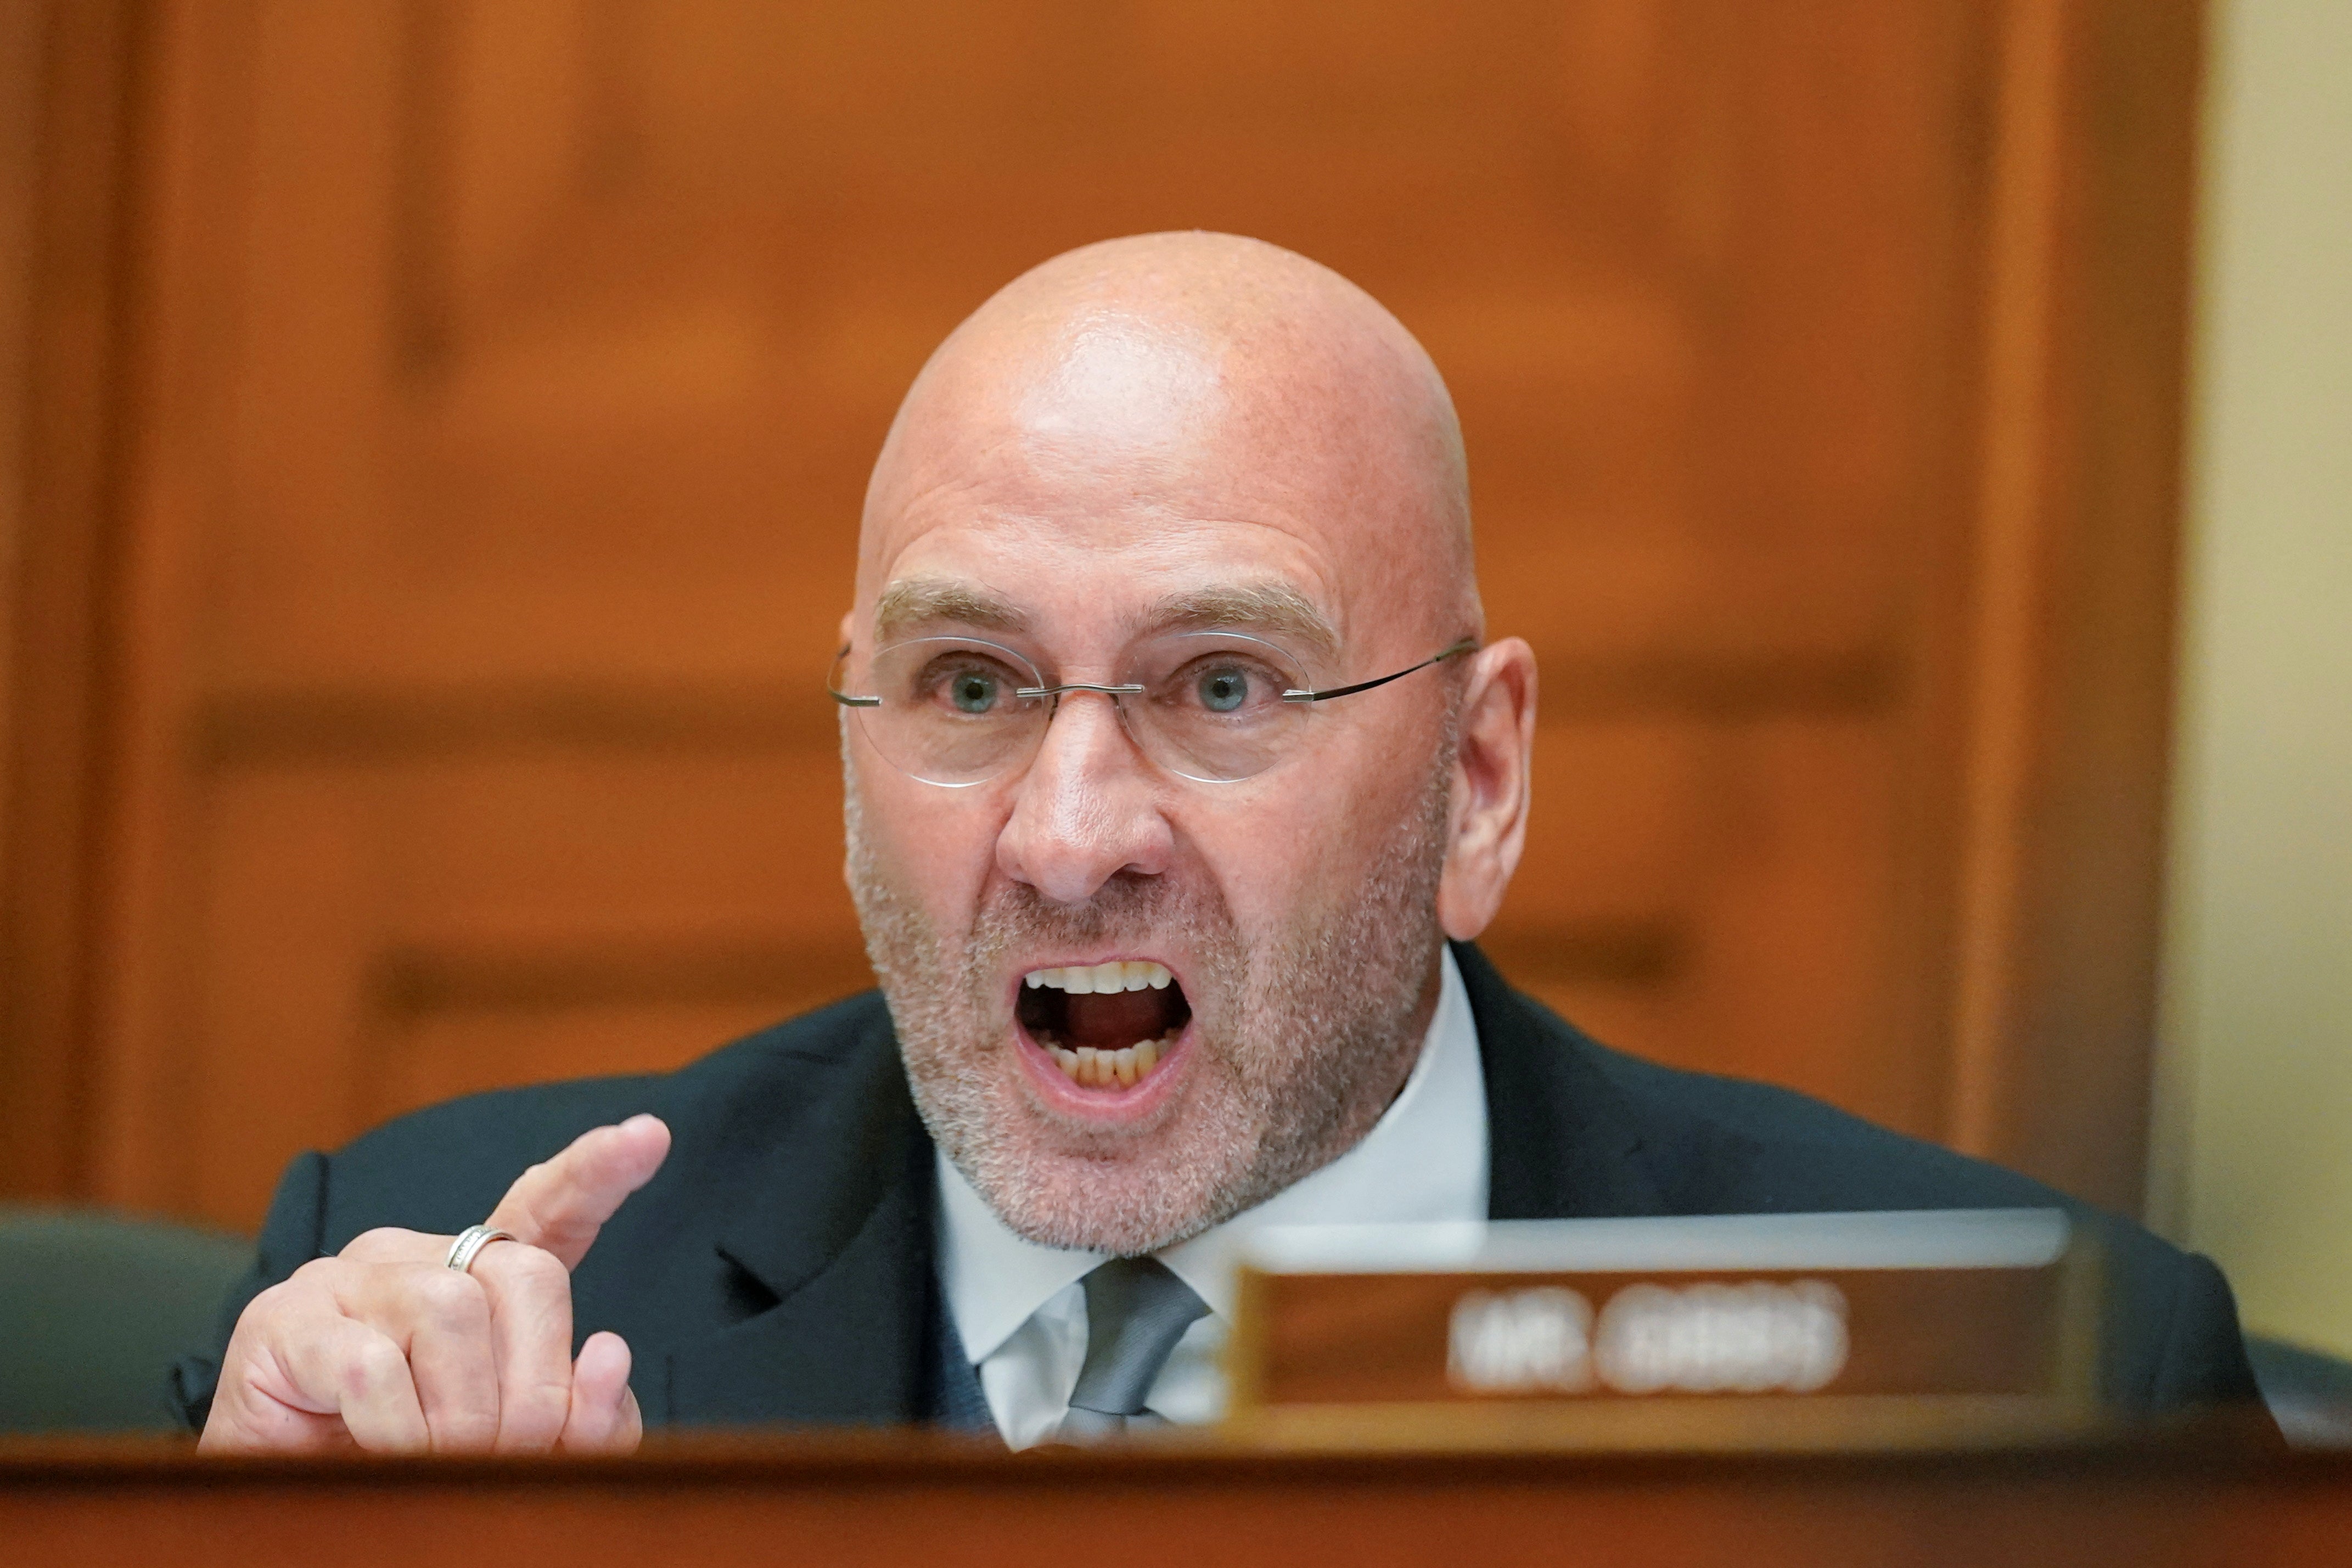 U.S. Representative Clay Higgins (R-LA) speaks during a House Committee on Oversight and Reform hearing on gun violence on Capitol Hill in Washington, U.S. June 8, 2022